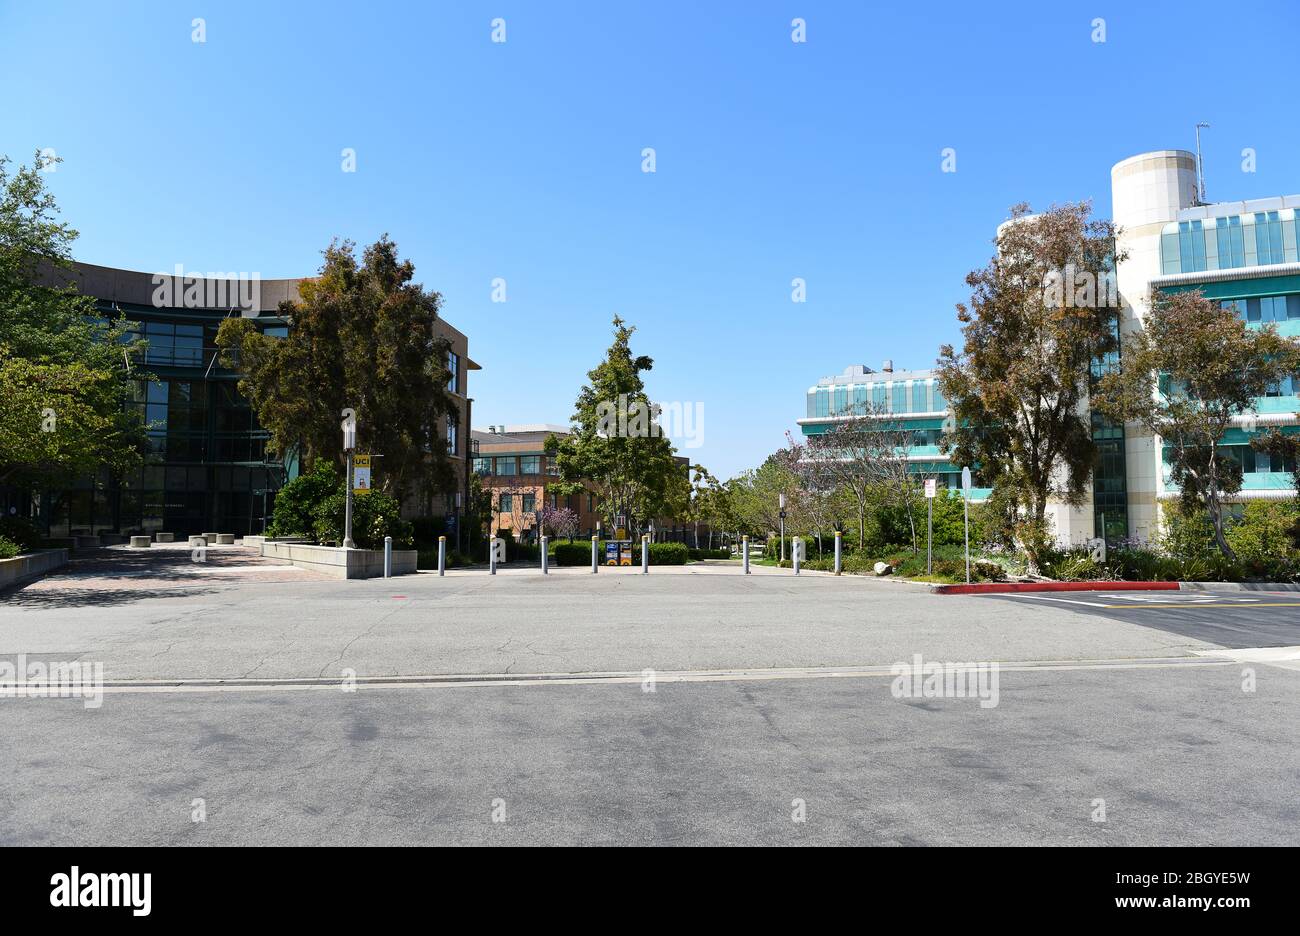 IRIVNE, CALIFORNIA - 21 APRIL 2020: Natural Sciences Building and McGaugh Hall on the campus of the University of California Irvine, UCI. Stock Photo